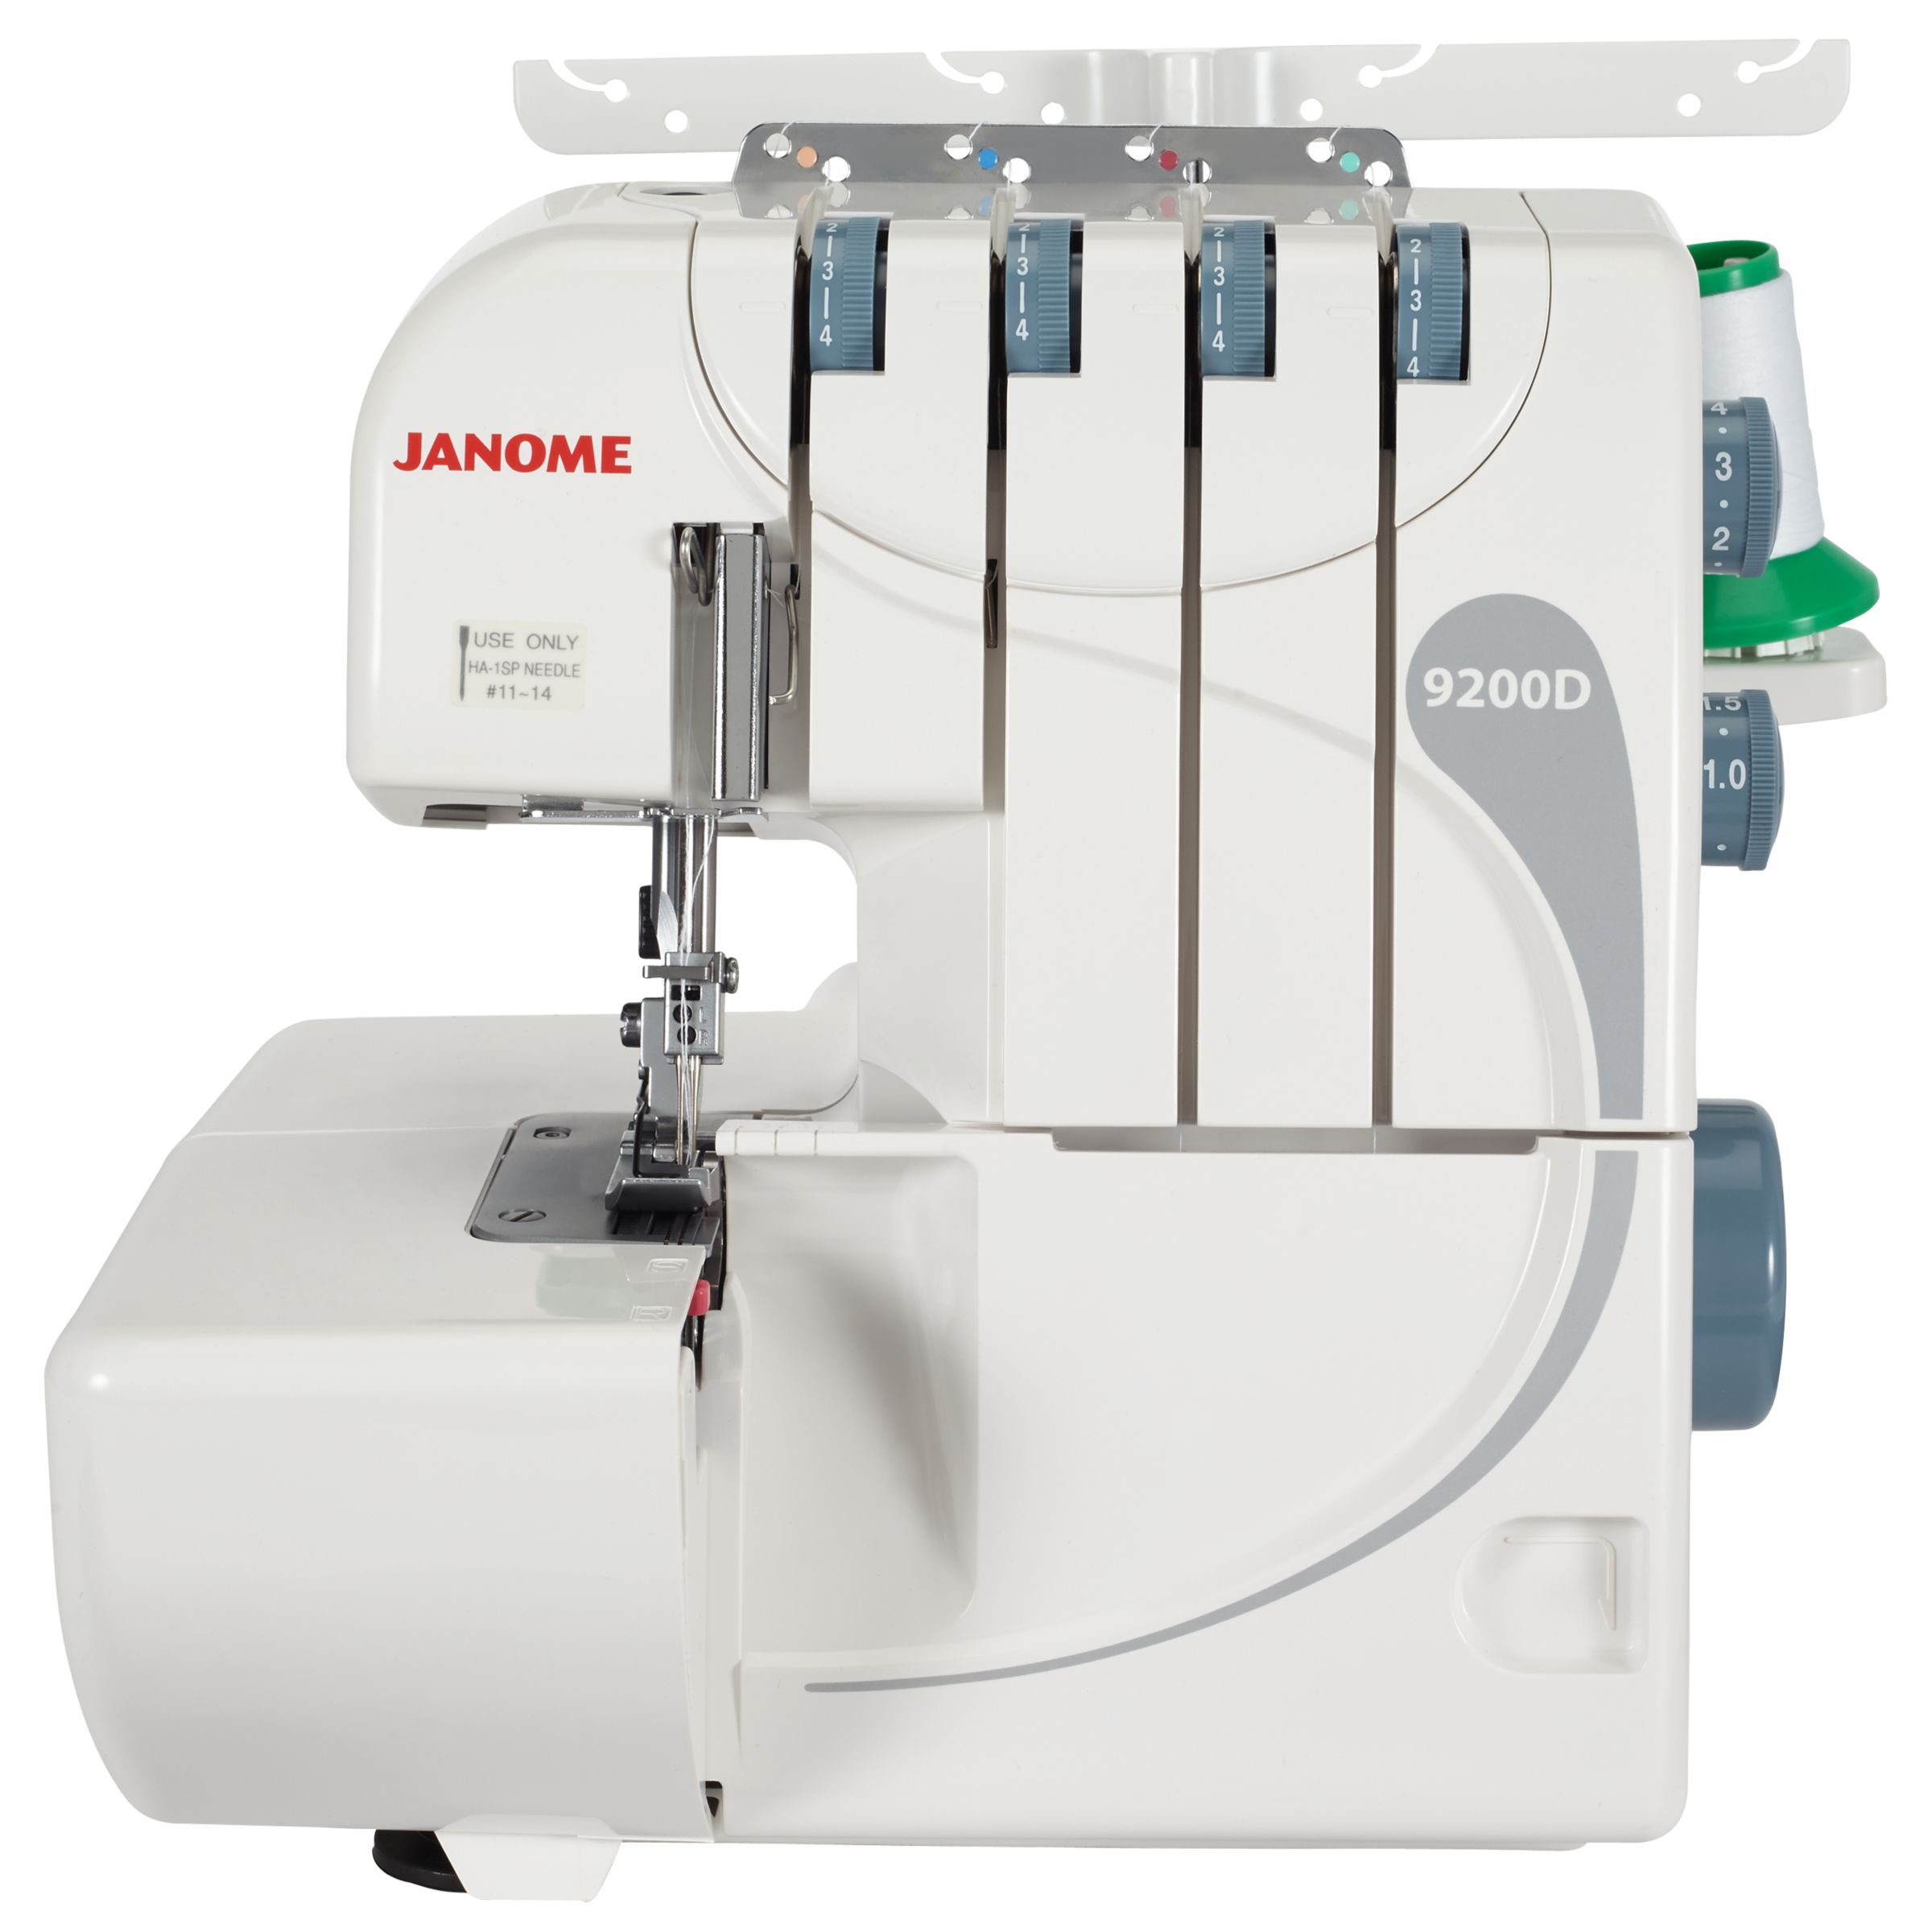 Mini Sewing Tips brought to you by the partnership of Janome